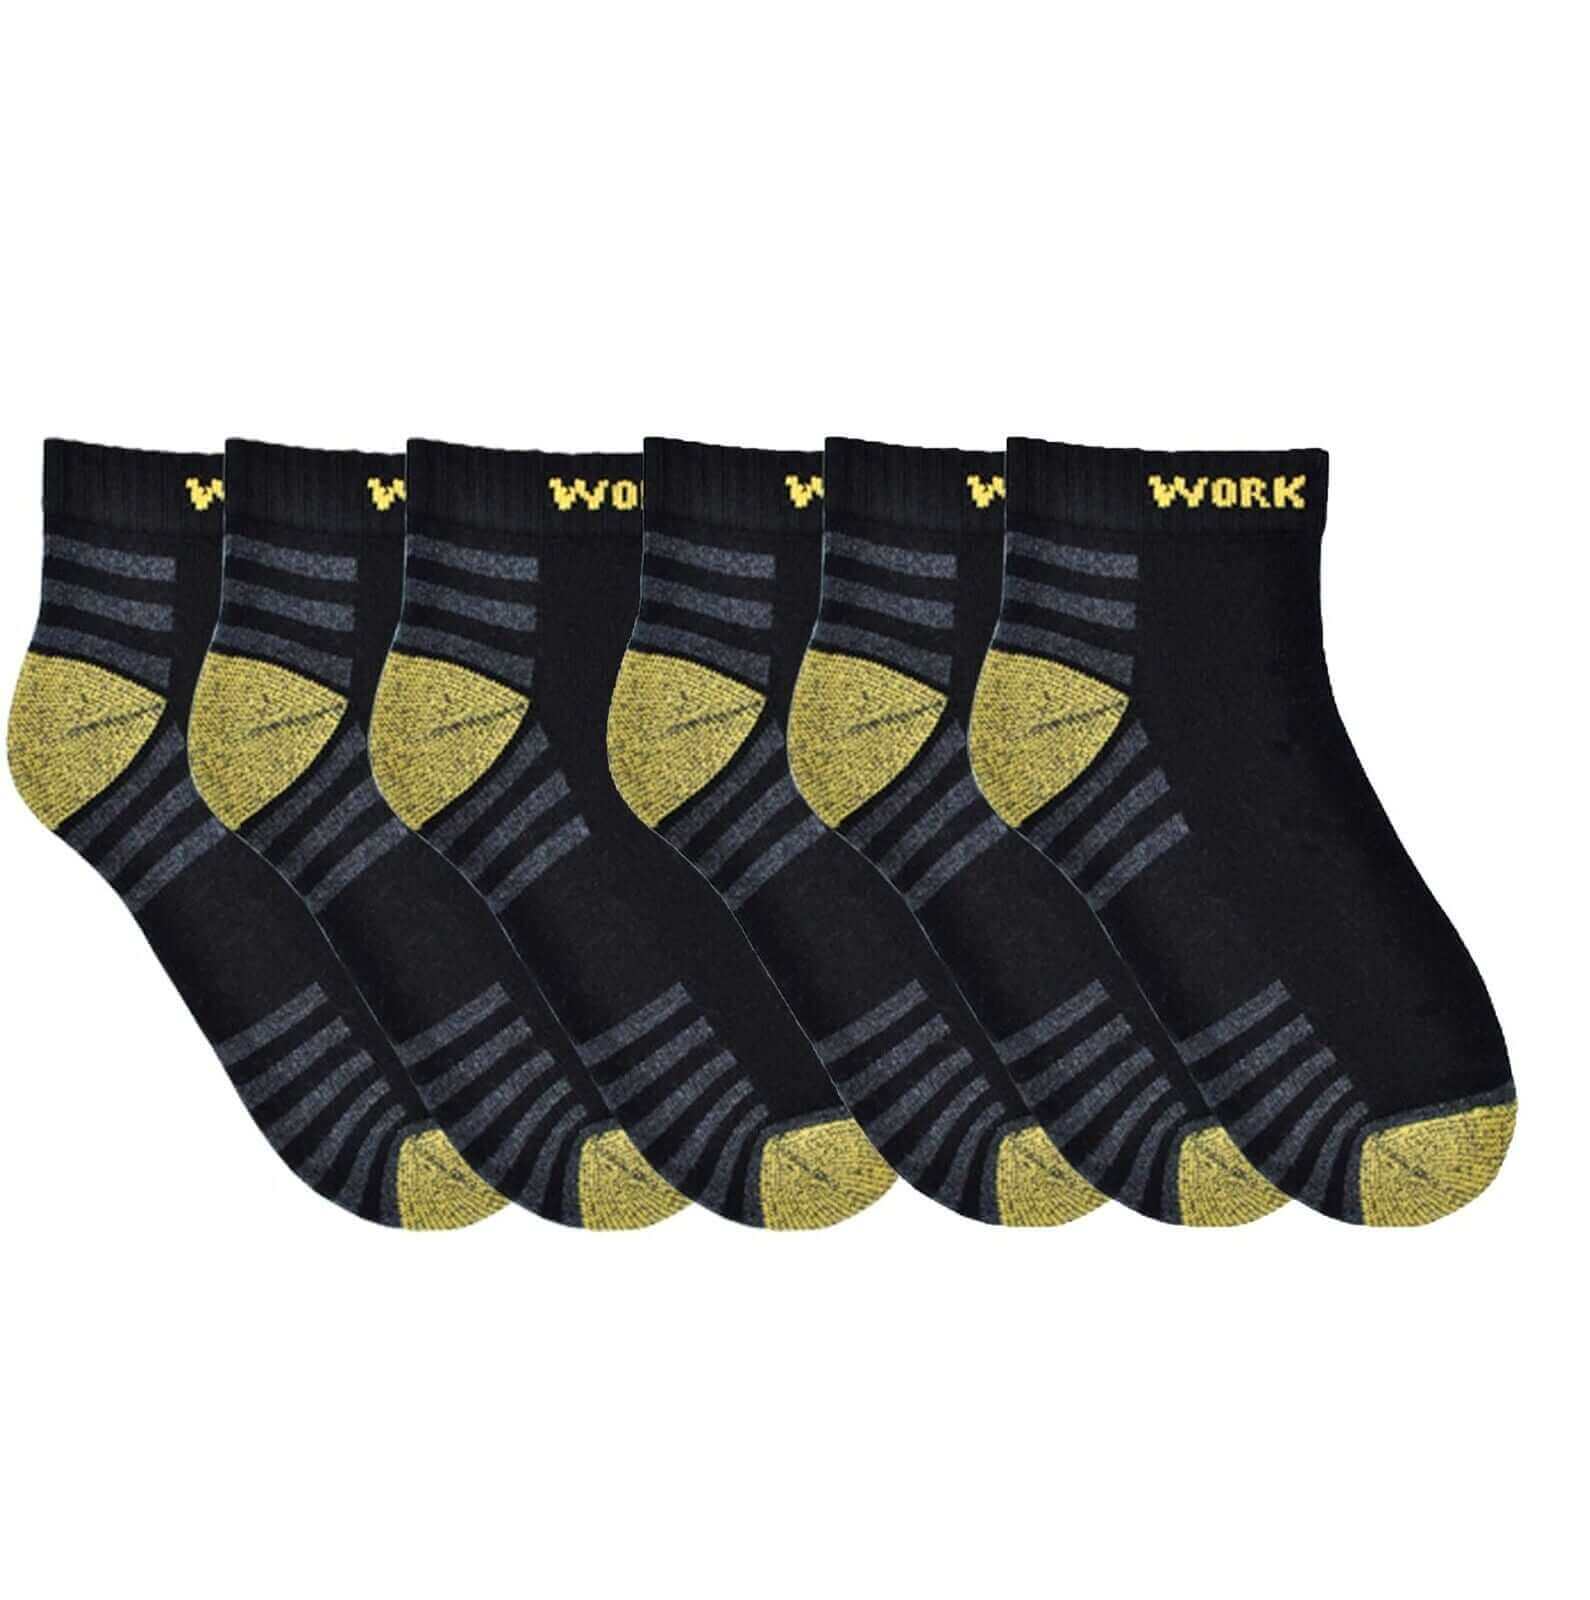 6 Pairs Of Men's Trainer Crew Ultimate Work Boot Socks. Buy now for £8.00. A Socks by Sock Stack. 6-11, anti bacterial, anti blister, assorted, athletics, black, boys, comfortable, cotton, elastane, hiking, home, mens, mens socks, outdoor, socks, sports,